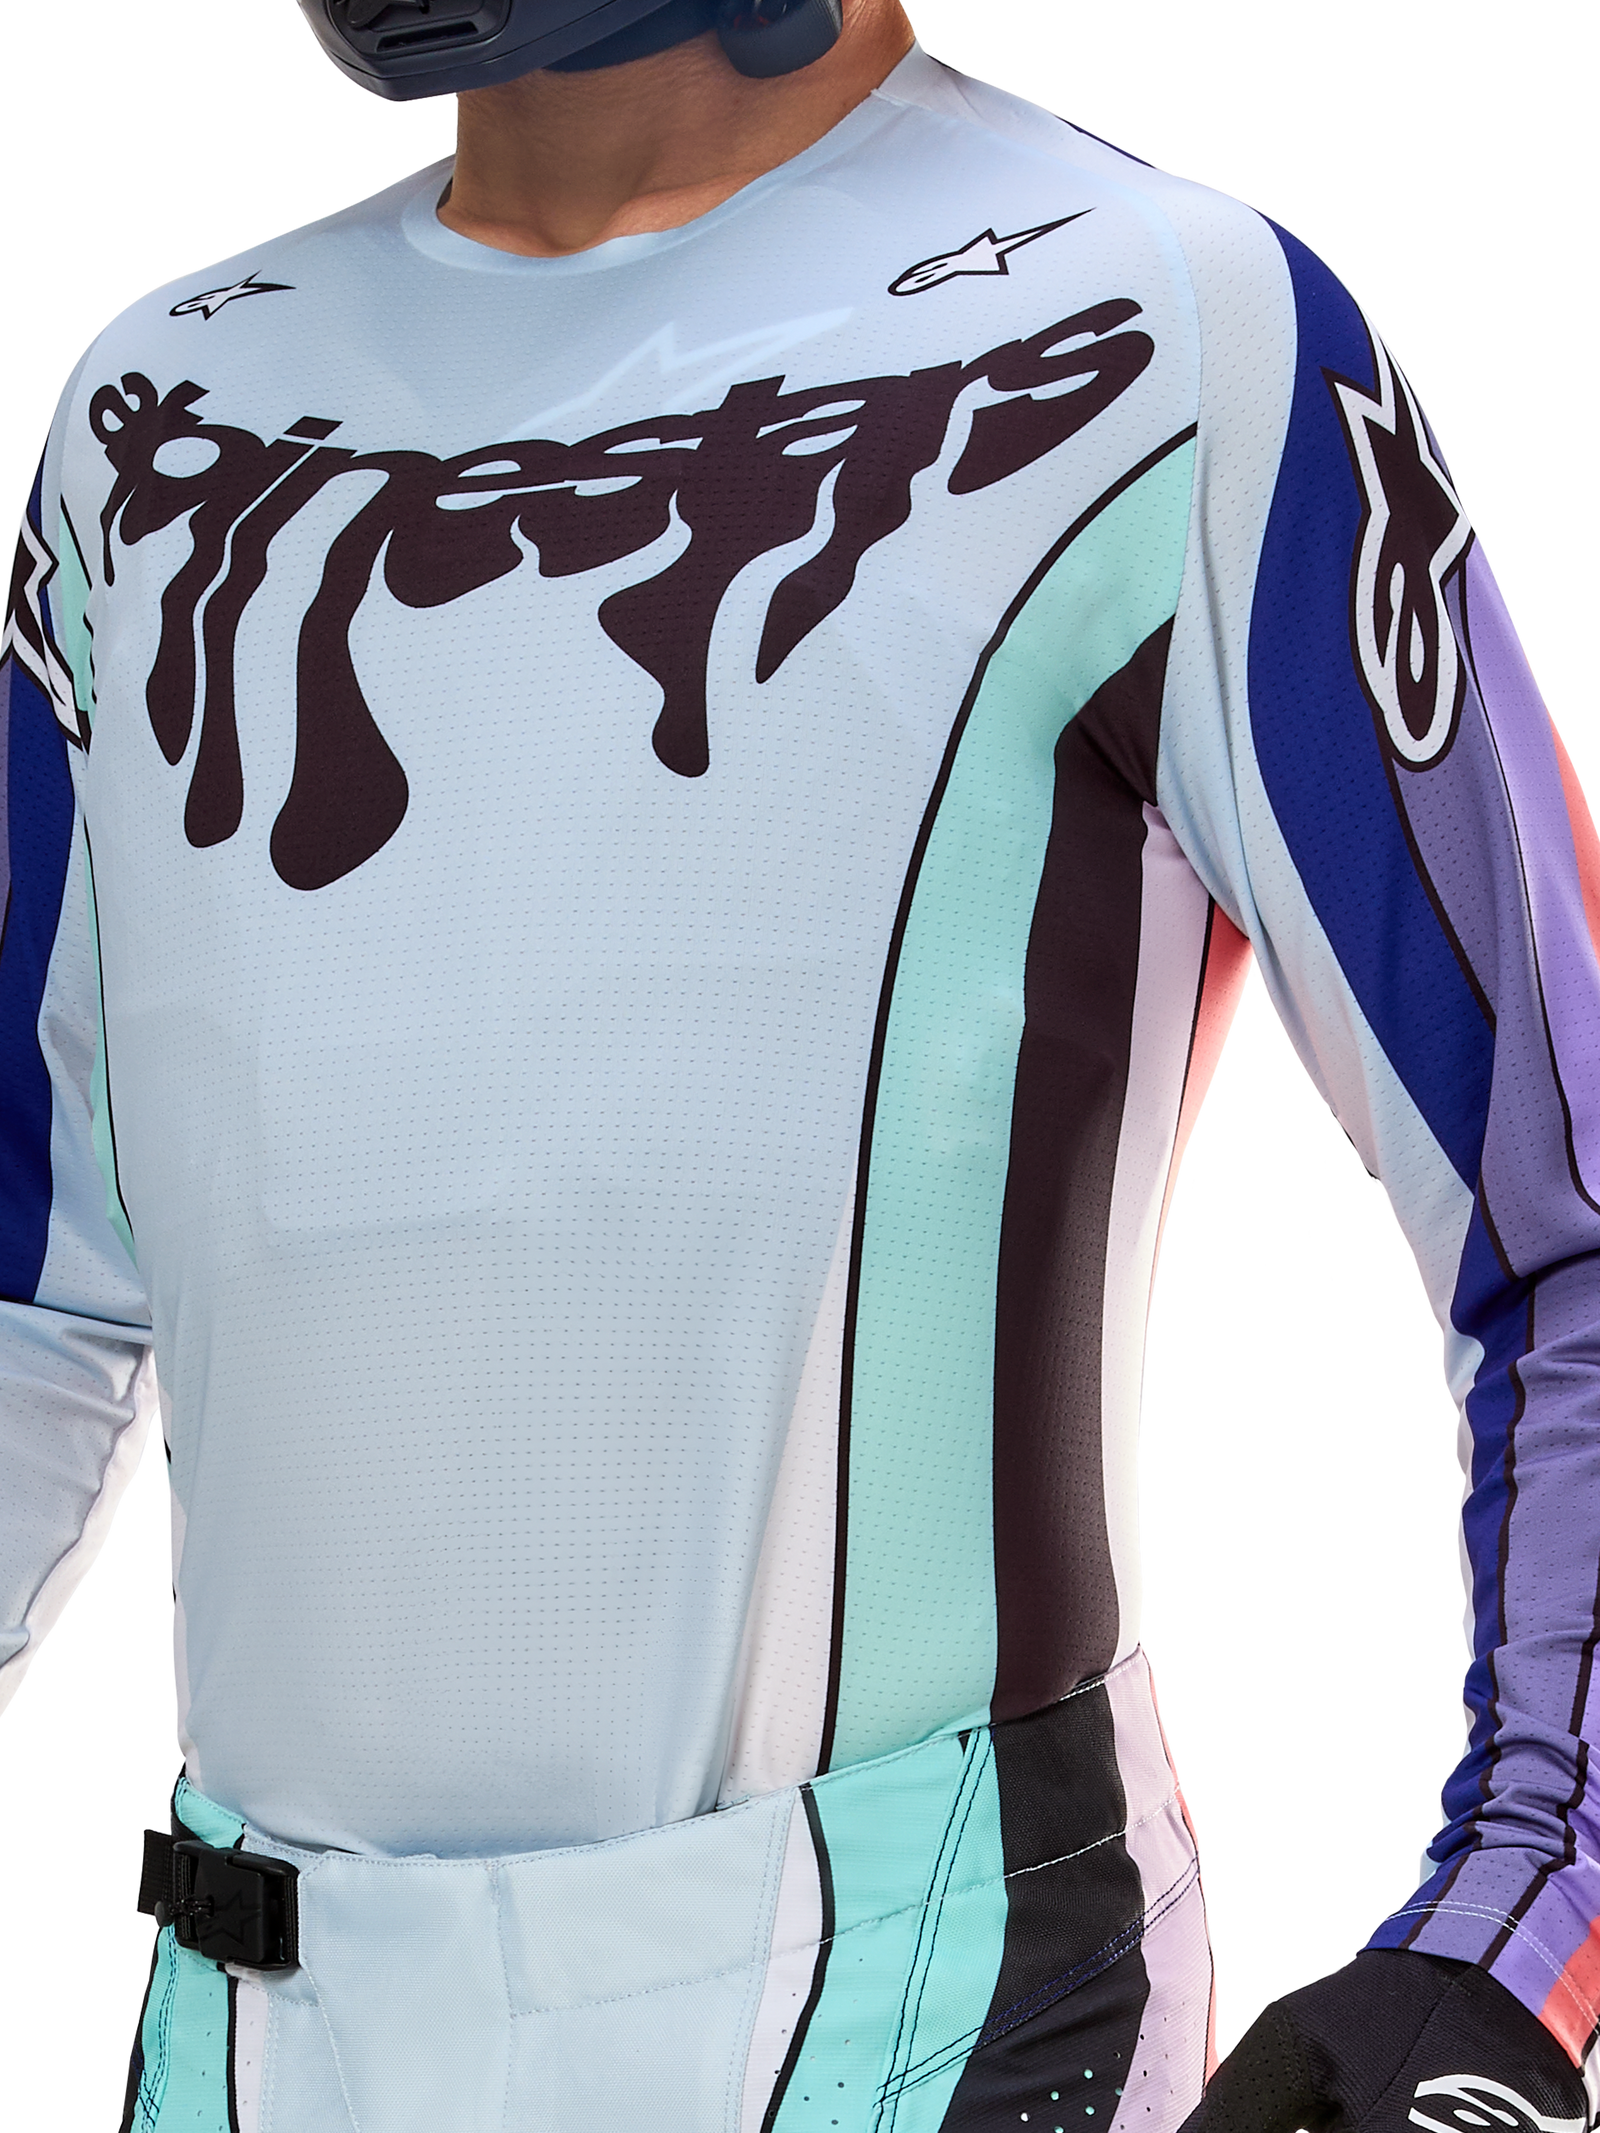 Limited Edition Techstar Imperial Maglia